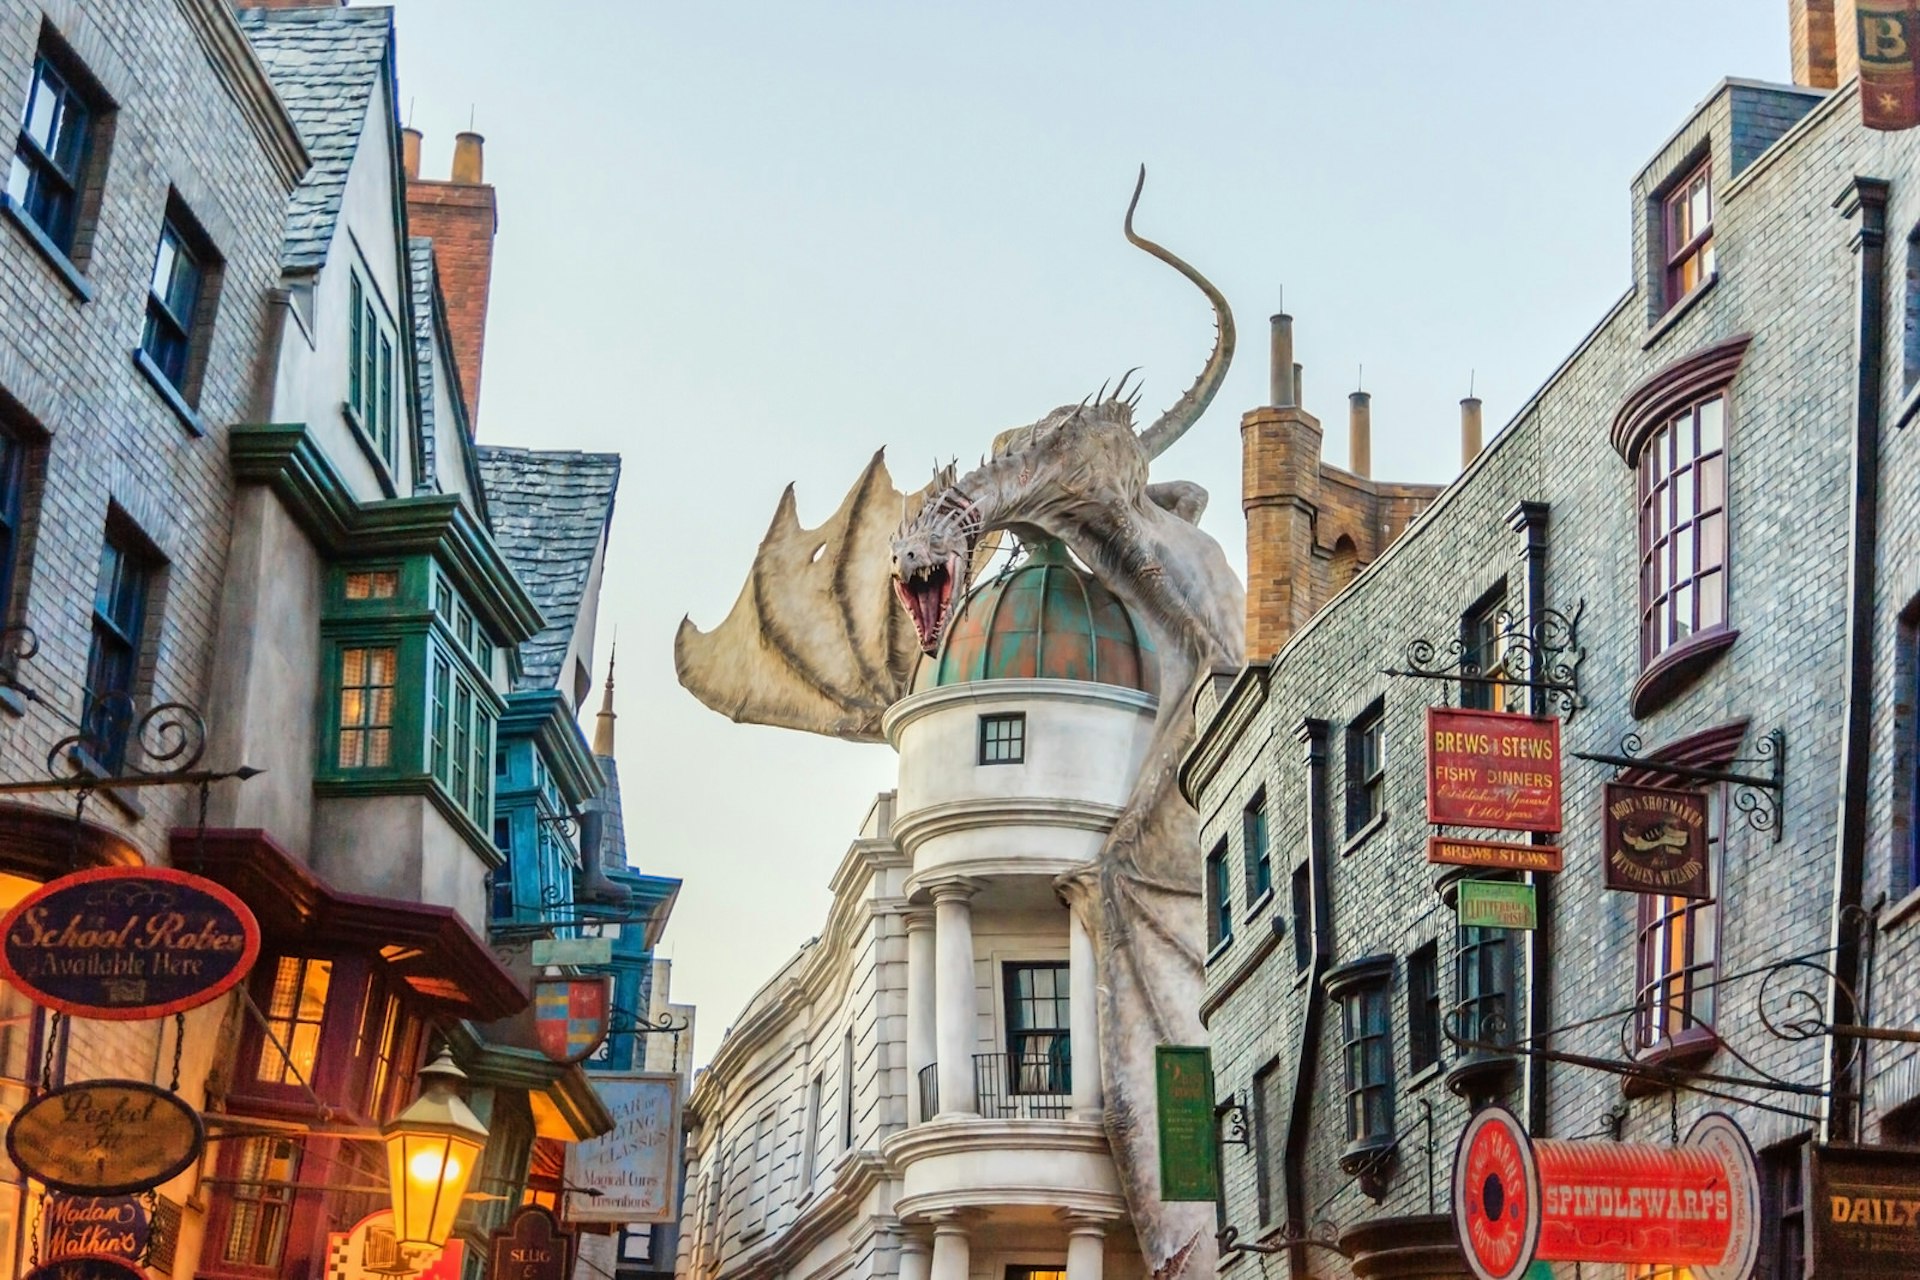 A street at the Wizarding World of Harry Potter in Florida, full of quaint, crooked olde-worlde houses and shops with signs hanging outside; the most notable building has a cupola on its roof which is being straddled by an angry-looking dragon.